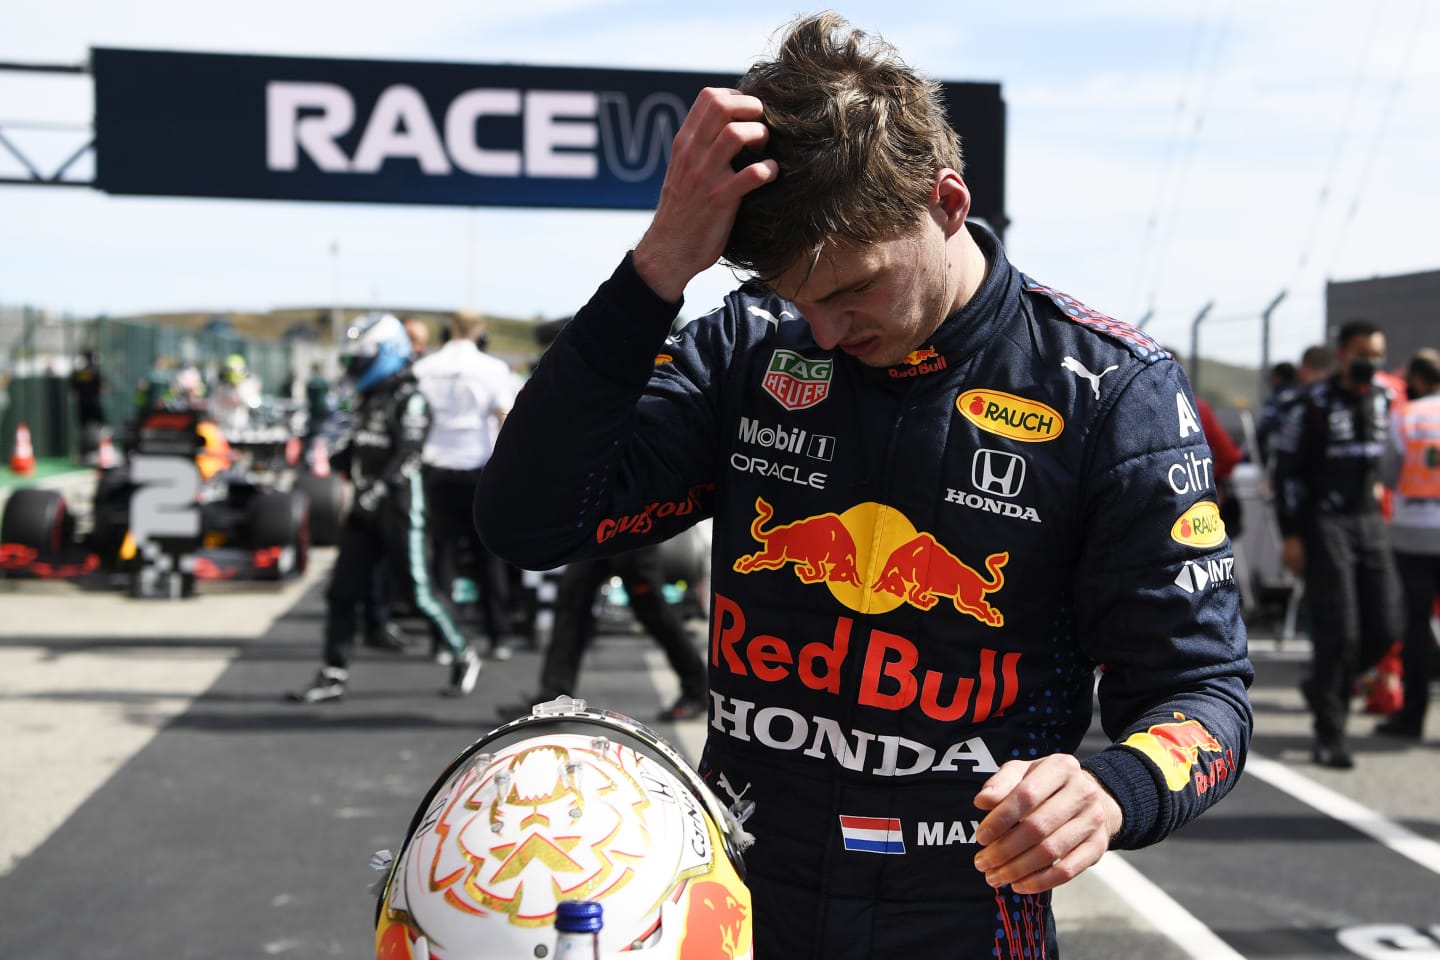 PORTIMAO, PORTUGAL - MAY 02: Second placed Max Verstappen of Netherlands and Red Bull Racing reacts in parc ferme after the F1 Grand Prix of Portugal at Autodromo Internacional Do Algarve on May 02, 2021 in Portimao, Portugal. (Photo by Gabriel Bouys - Pool/Getty Images)